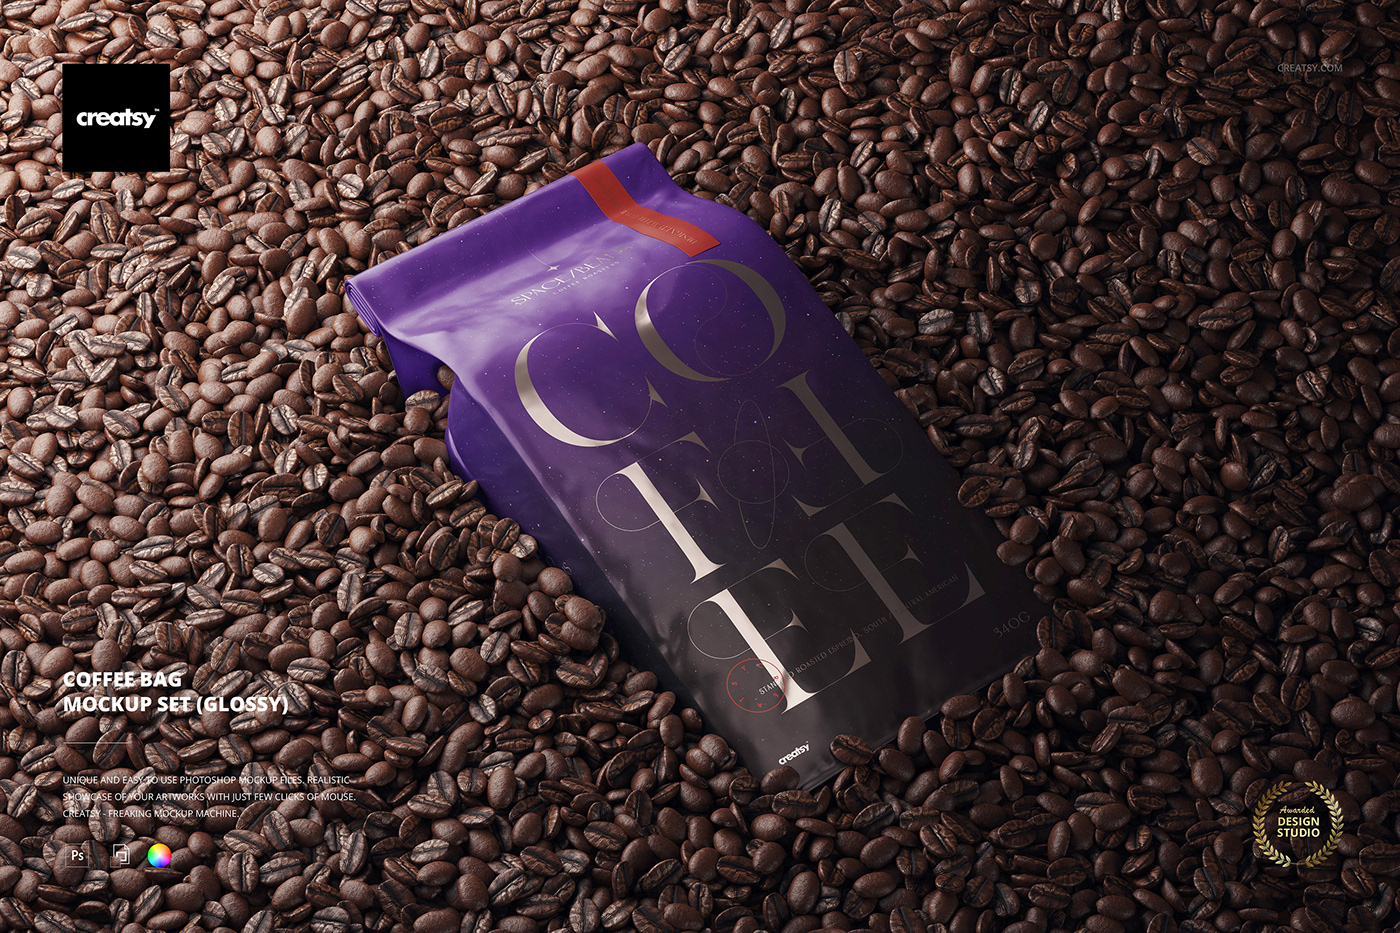 Coffee creatsy mock-up Mockup mockups Packaging paper pouch template